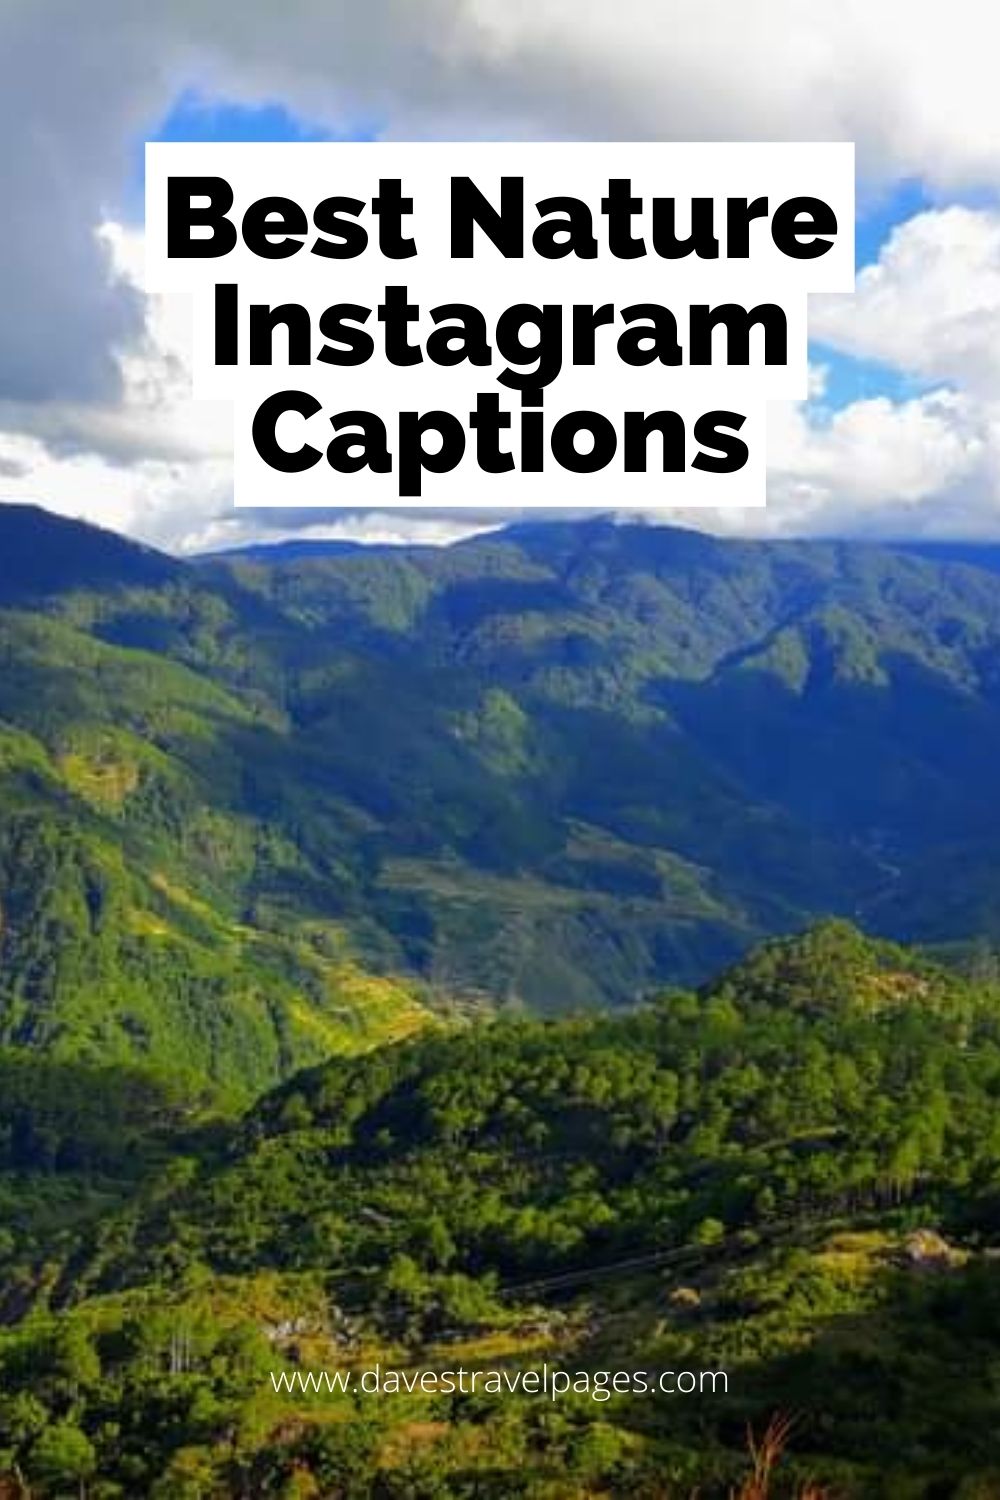 Instagram Captions About Nature